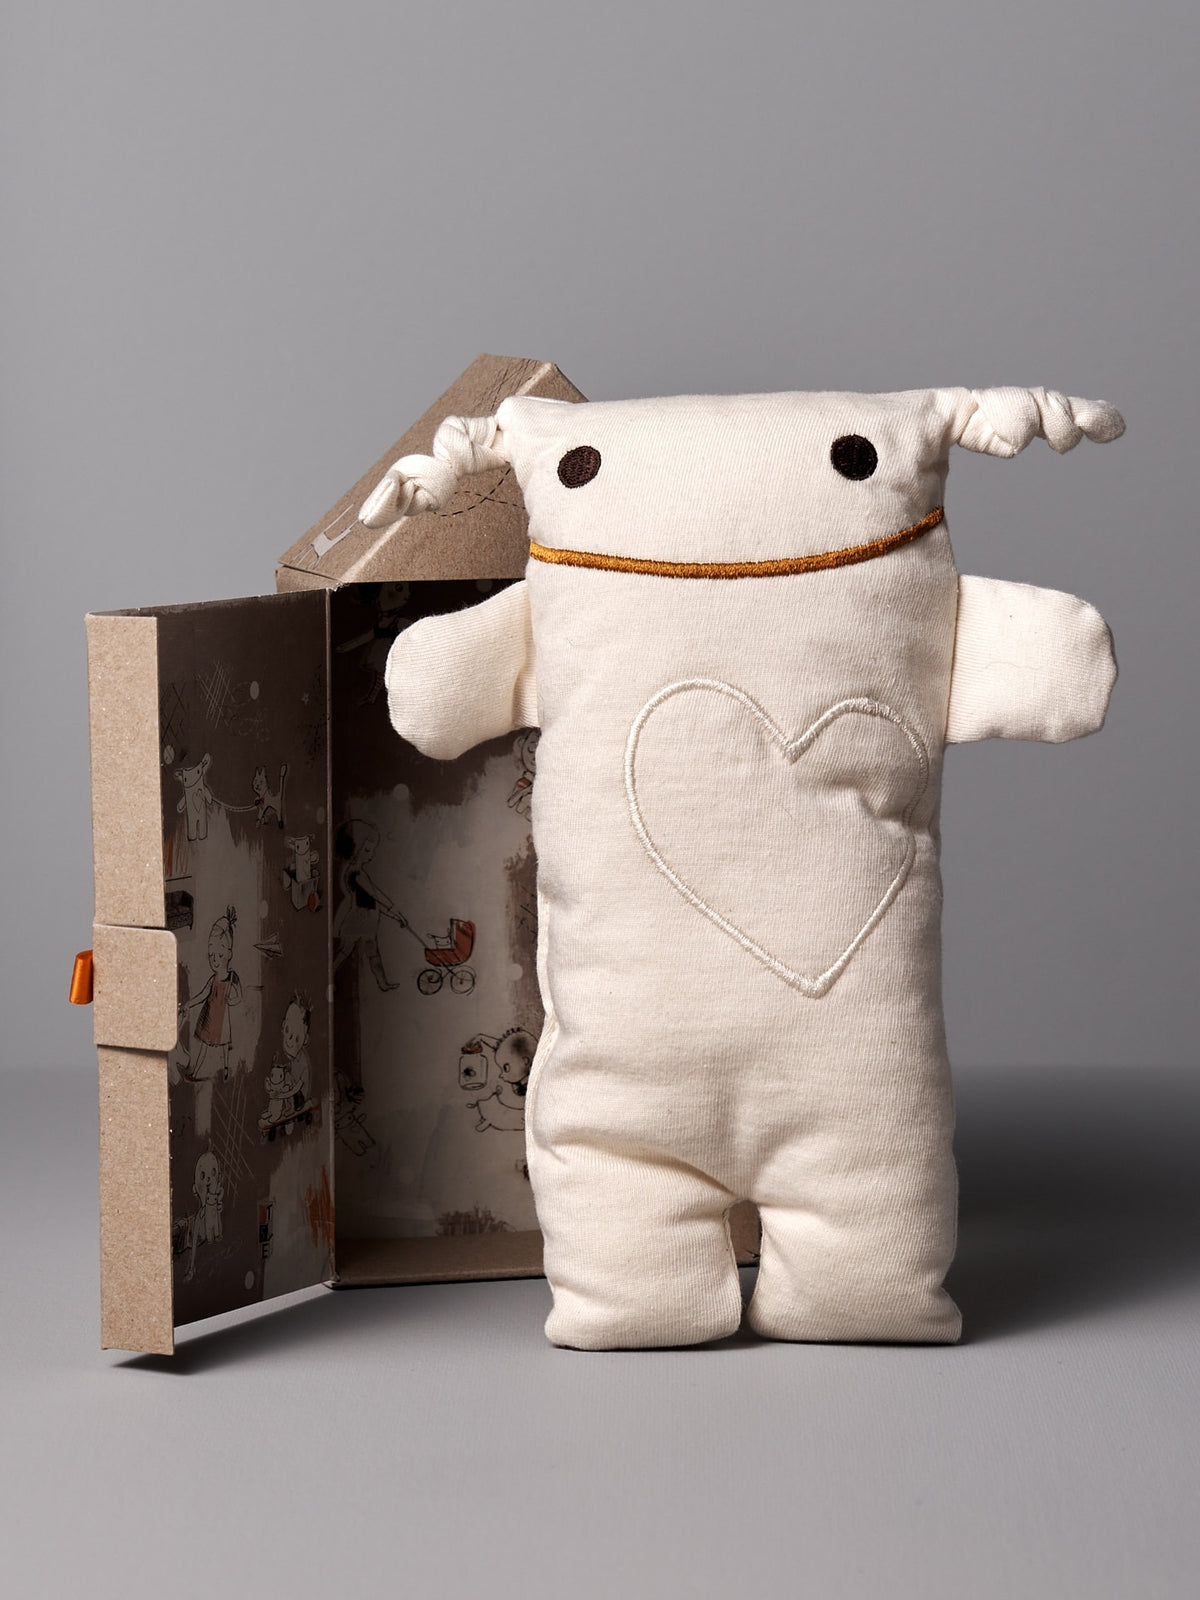 A white Monsieur Tsé-Tsé Classic stuffed animal made by Raplapla is sitting in a box.